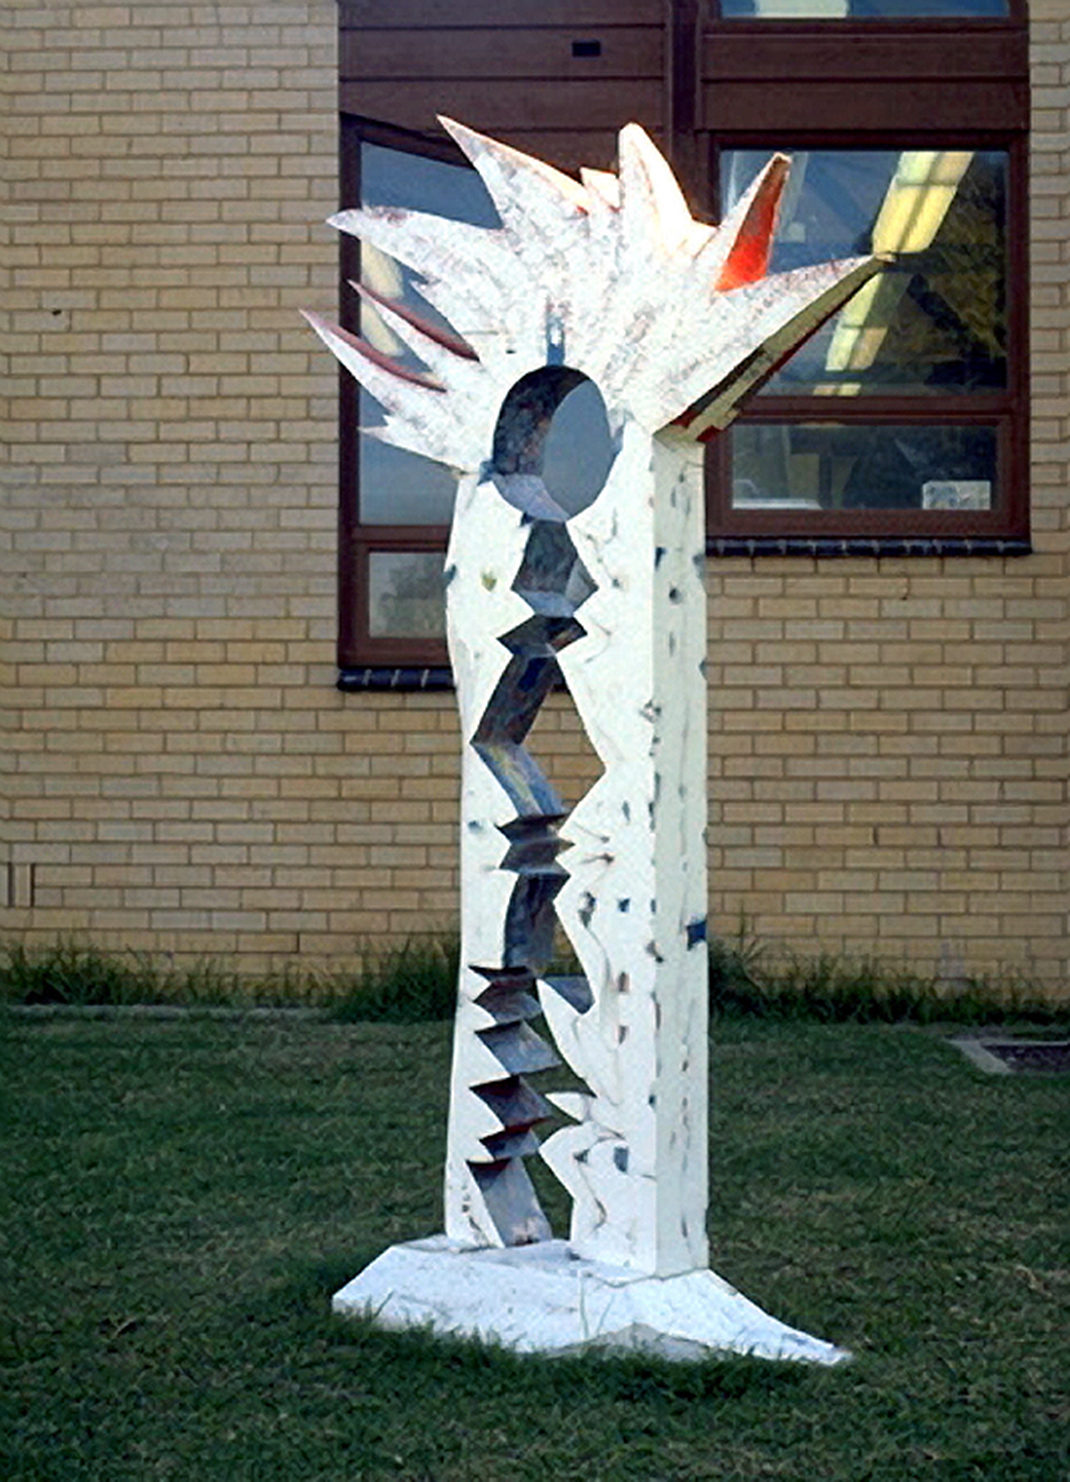 Totem One, 1985, sculpture by Adrian Mauriks.